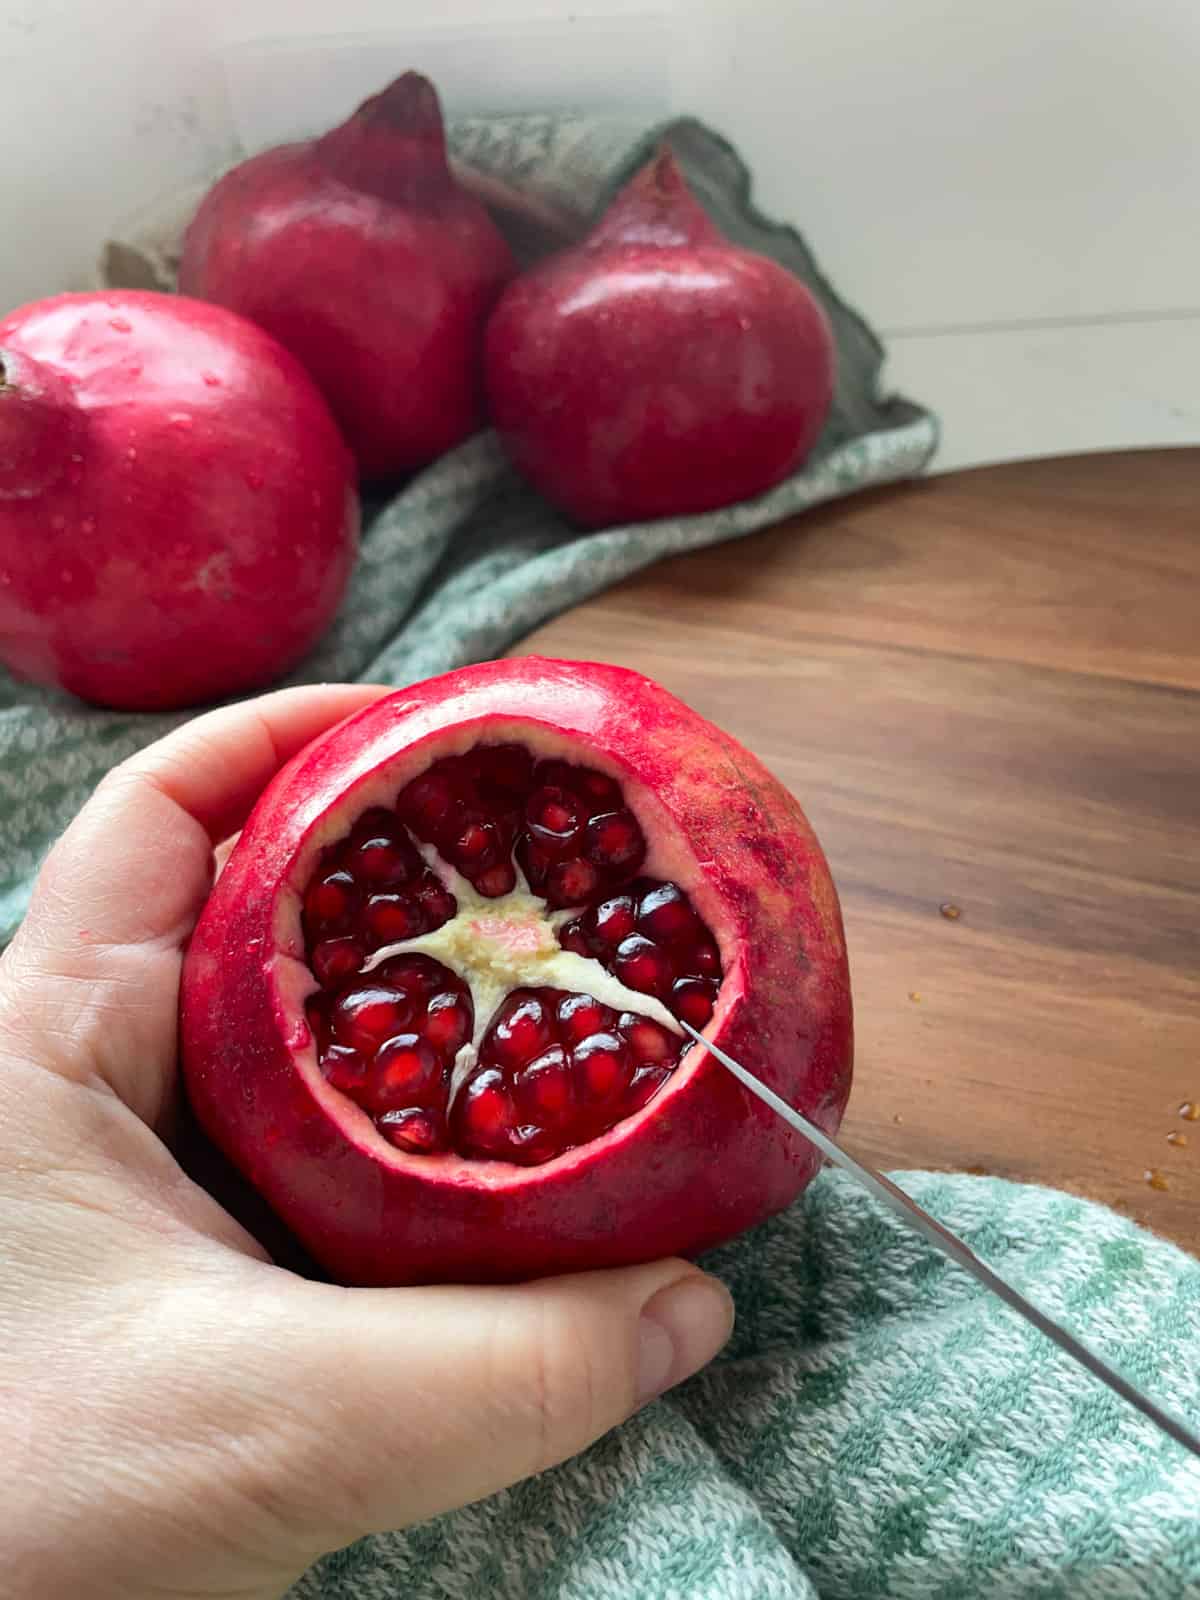 A pomegranate with the top removed showing the arils inside.